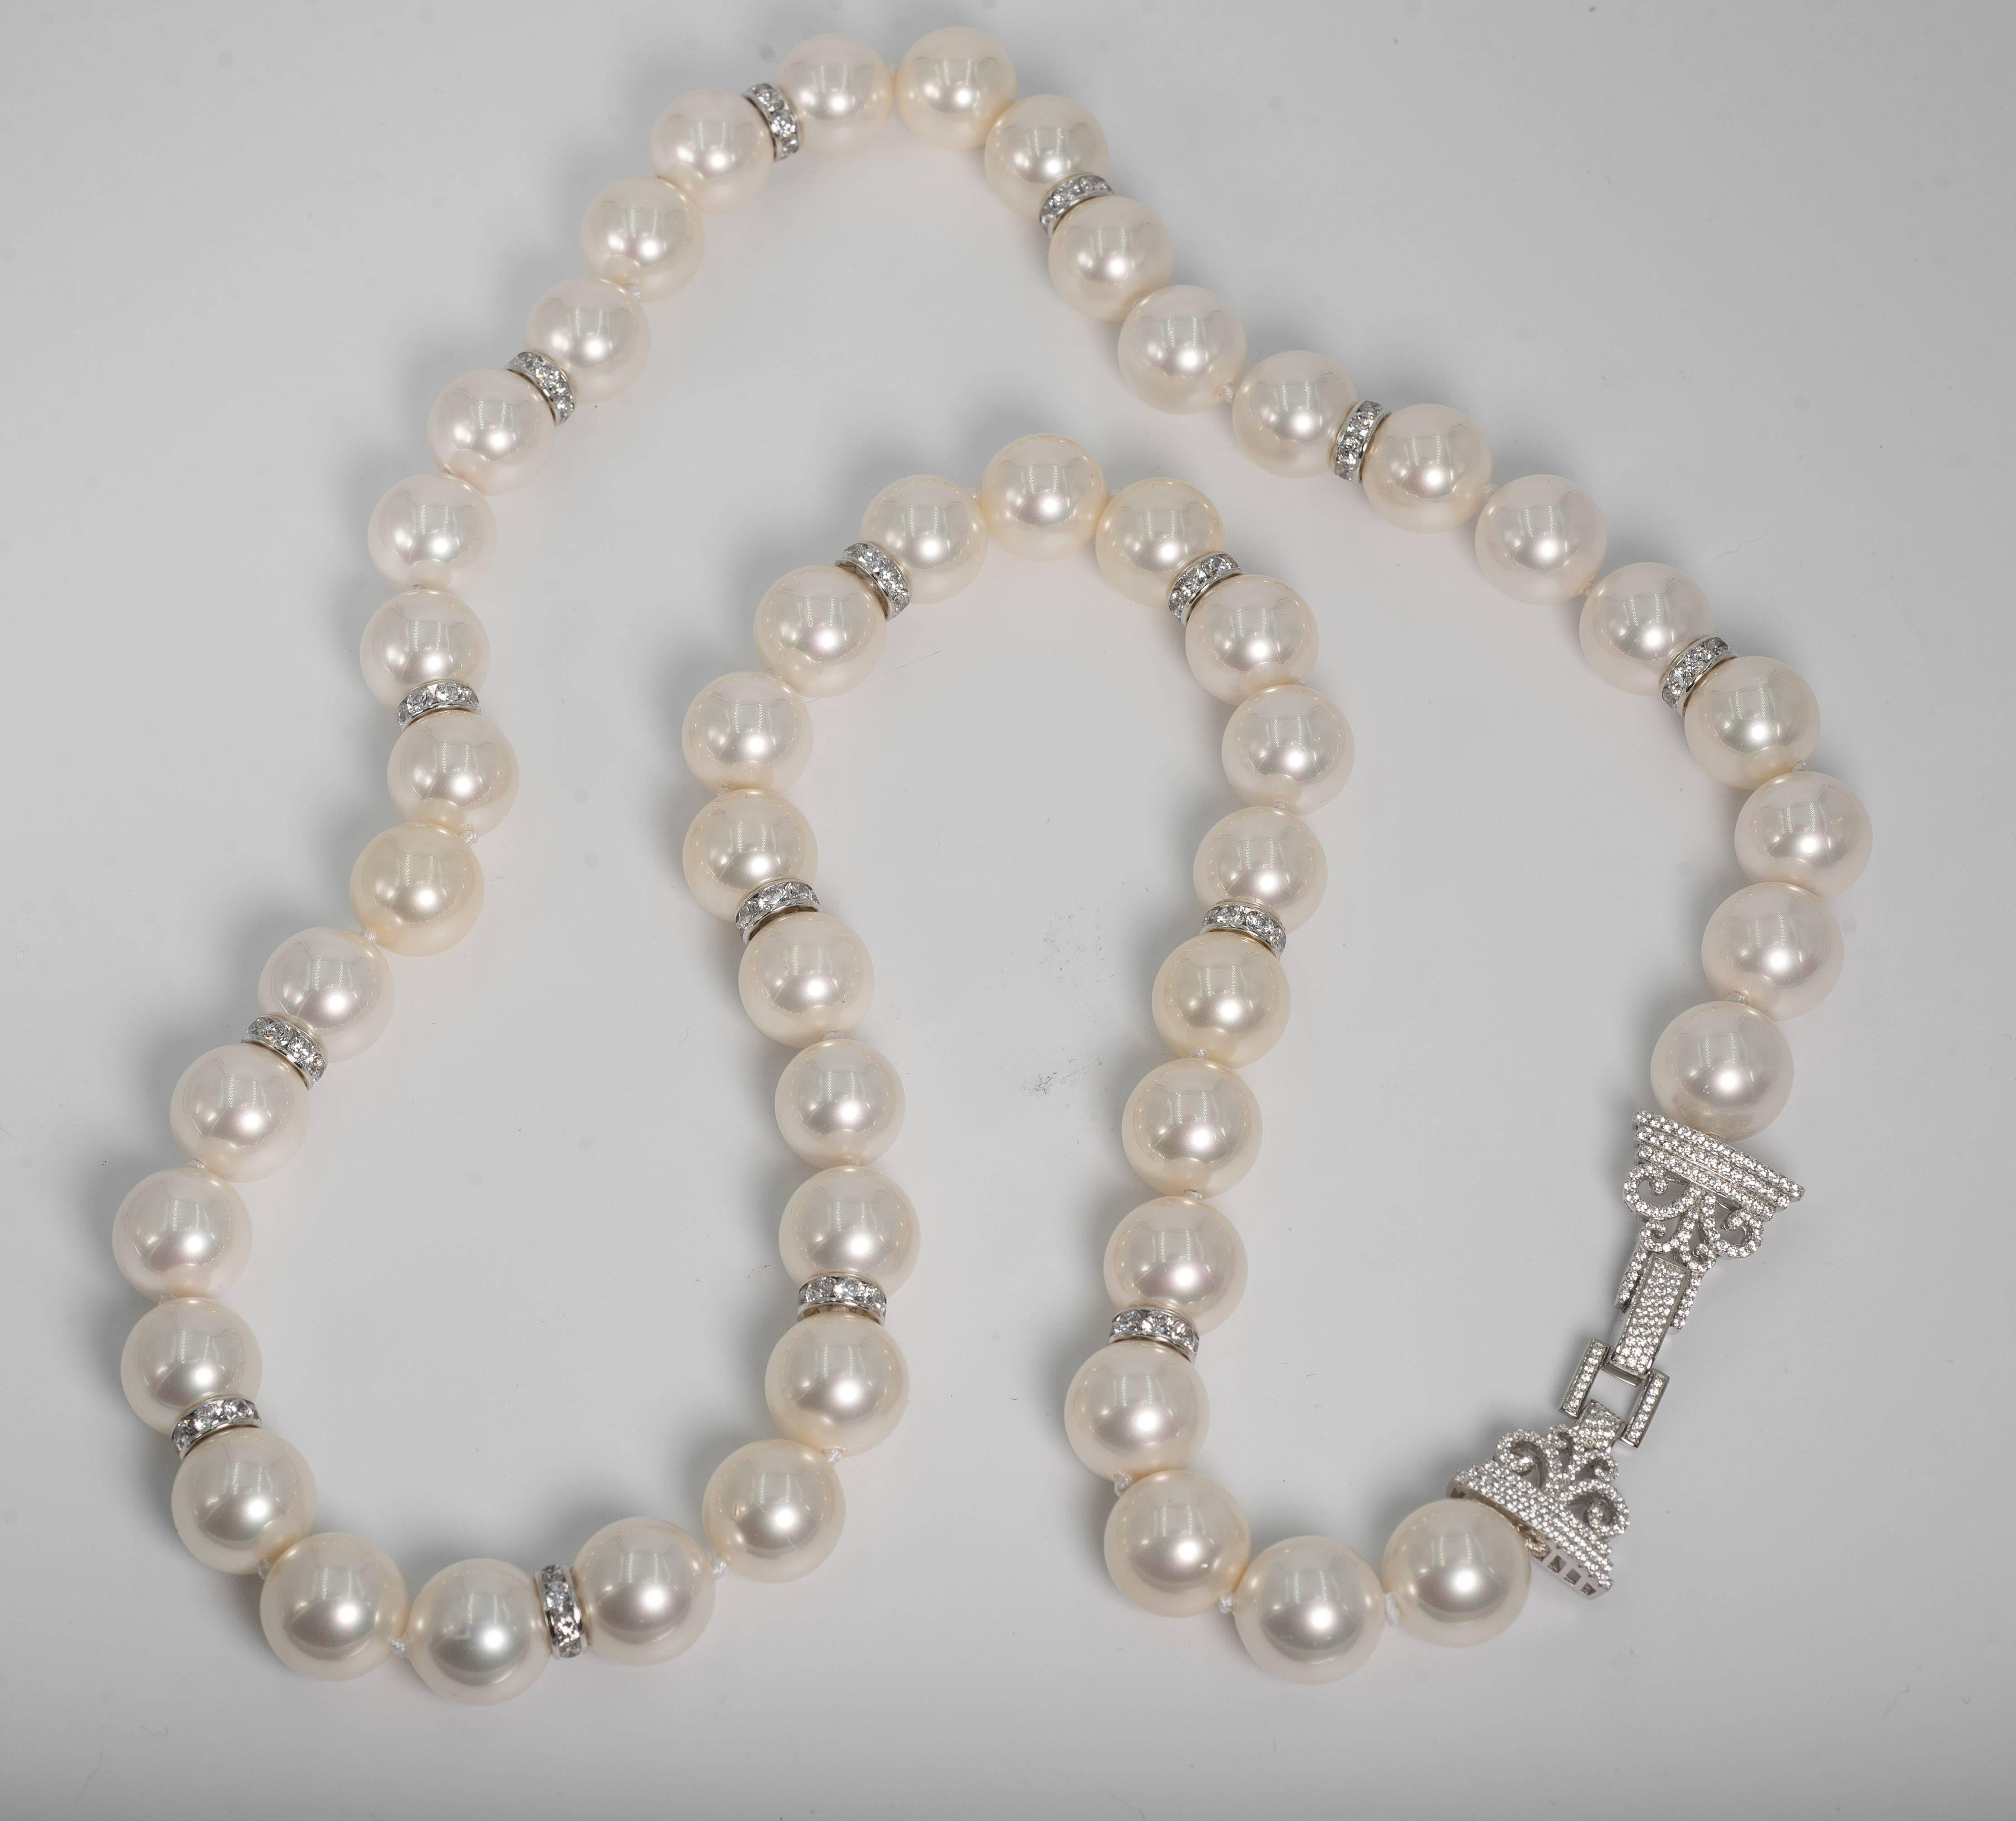 Our handmade Art Deco styleAudrey Hepburn Style faux pearls are of exquisite quality closely resembling the color and sheen of the best of Mikimoto pearls. Freshly hand strung knotted with silk threads. This wonderful necklace is 36 inches long,